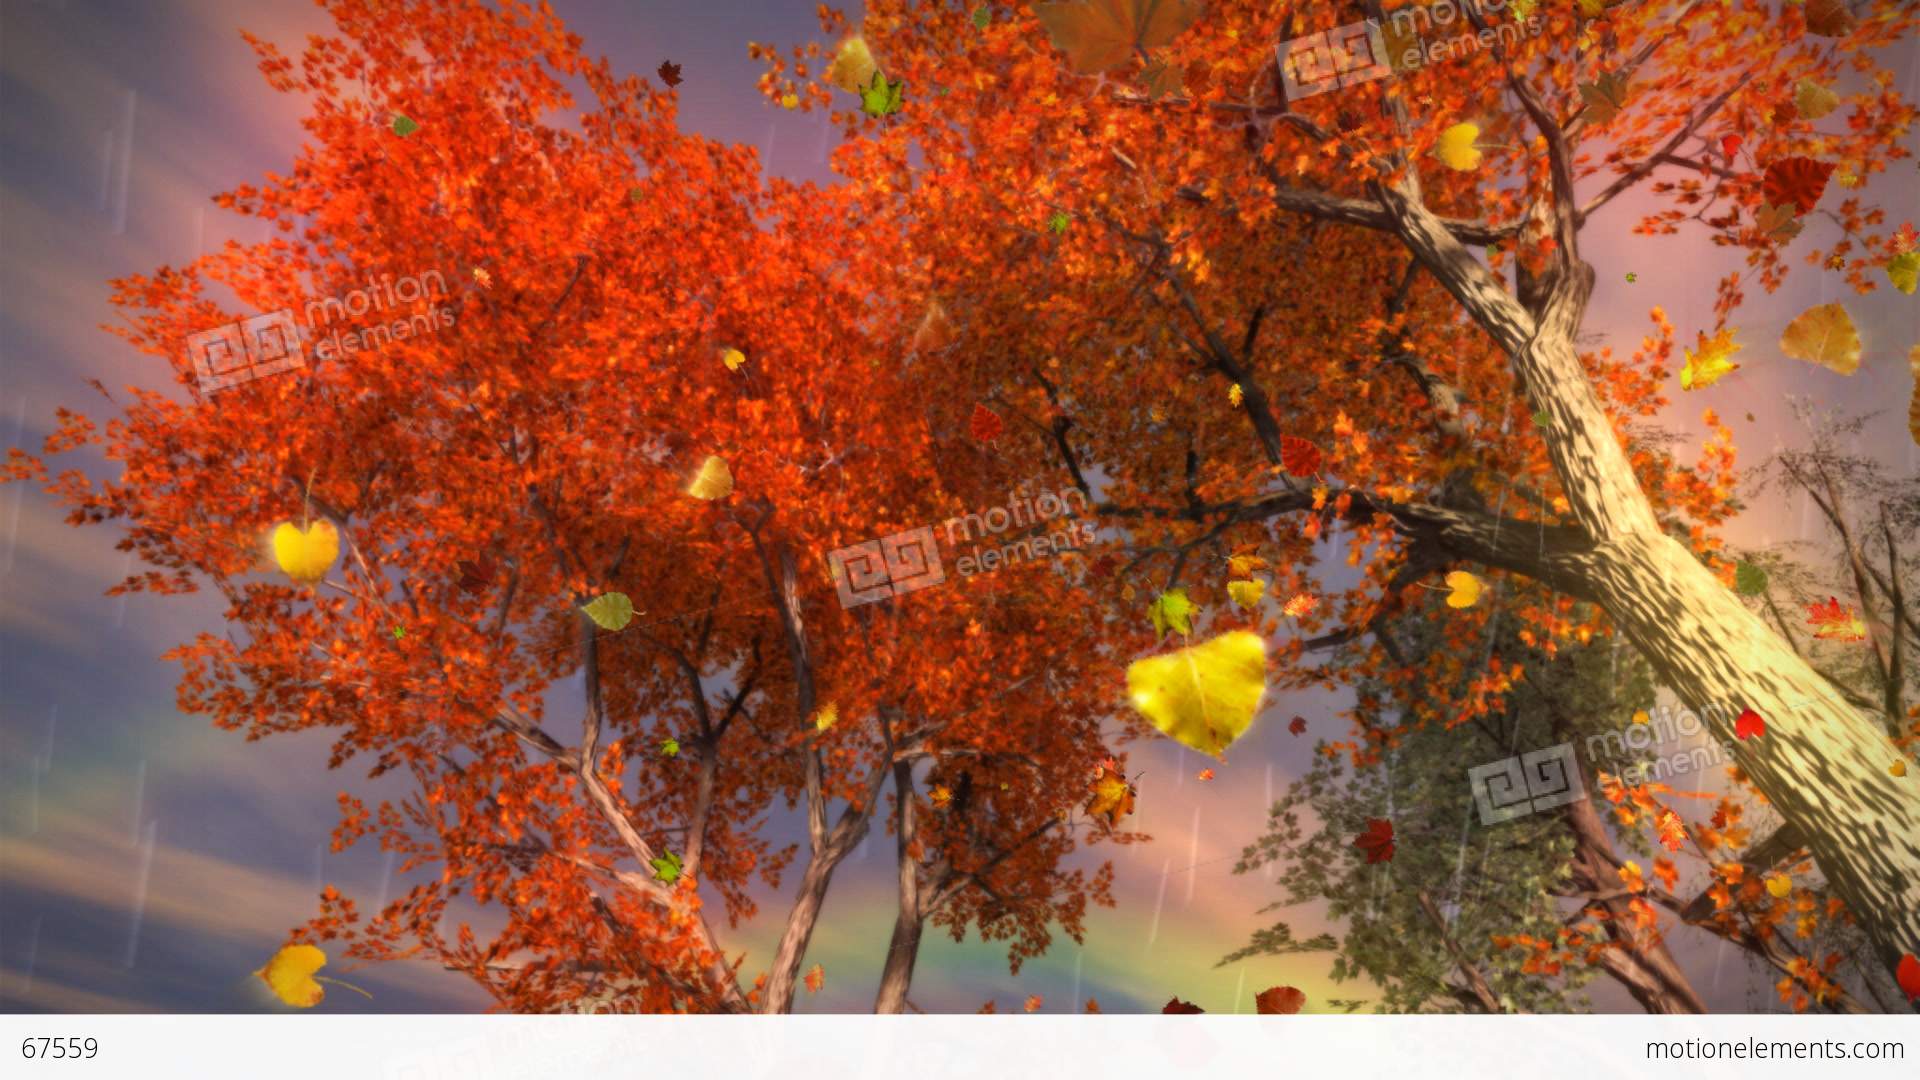 1035 Autumn Leaves Falling With Rainbow And Rain Stock Animation | 67559